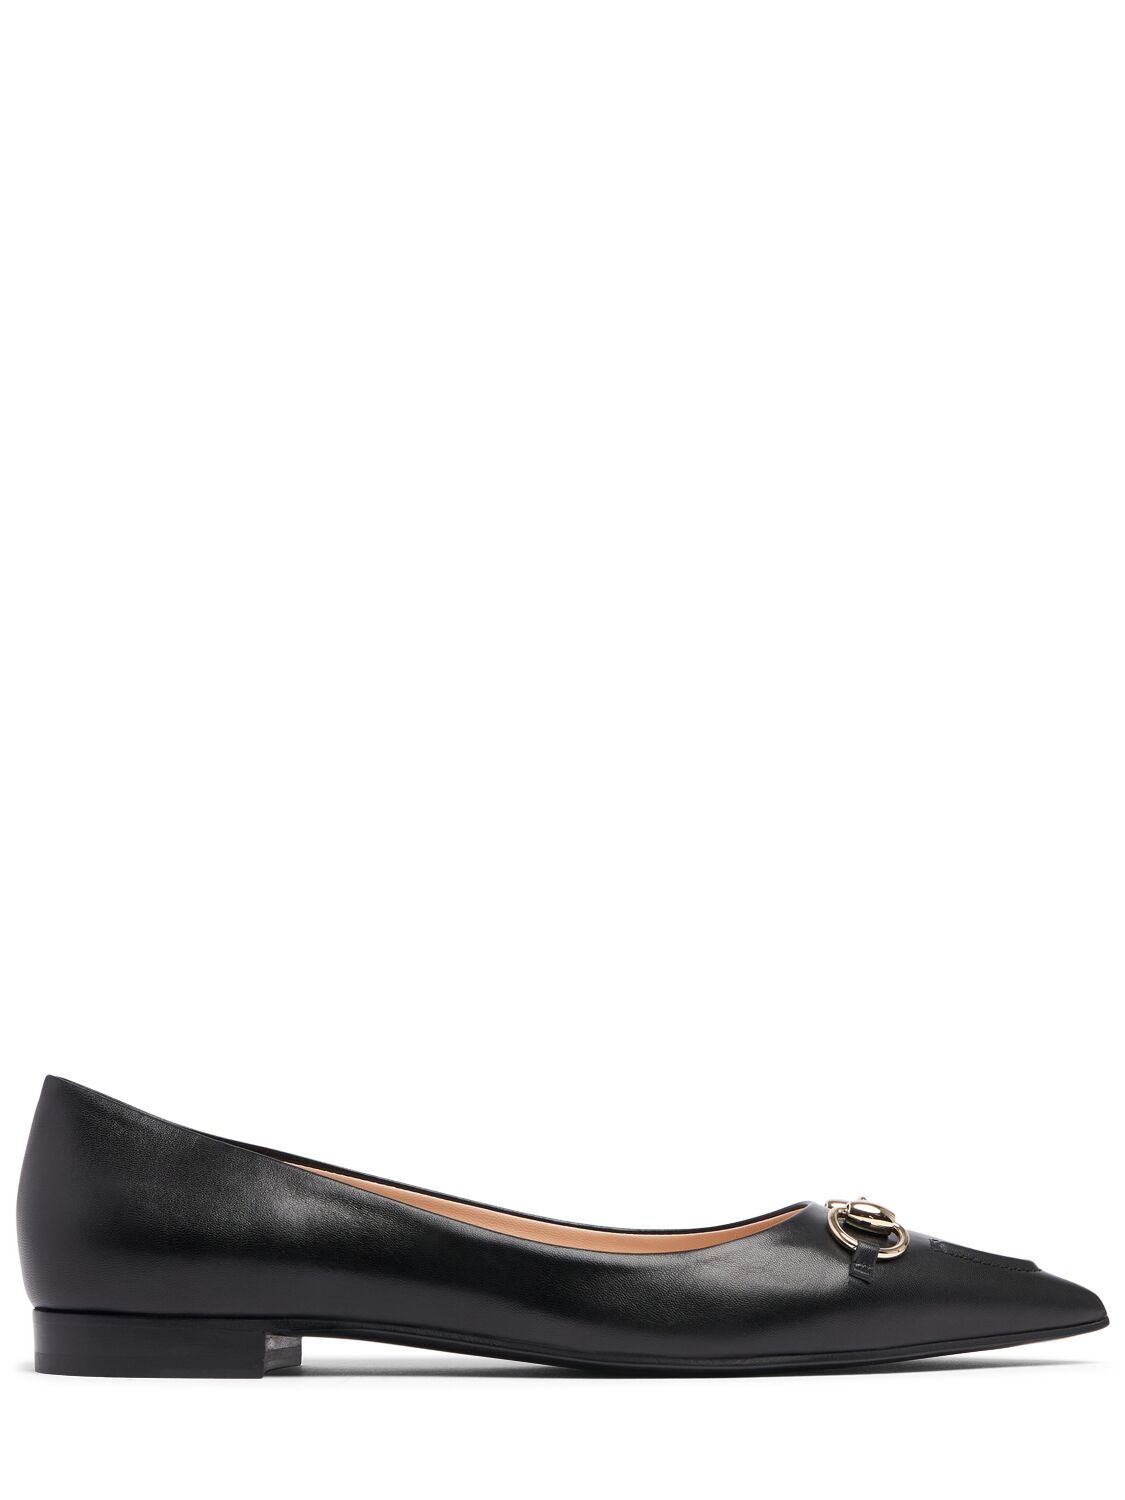 Image of Erin Leather Ballet Flats